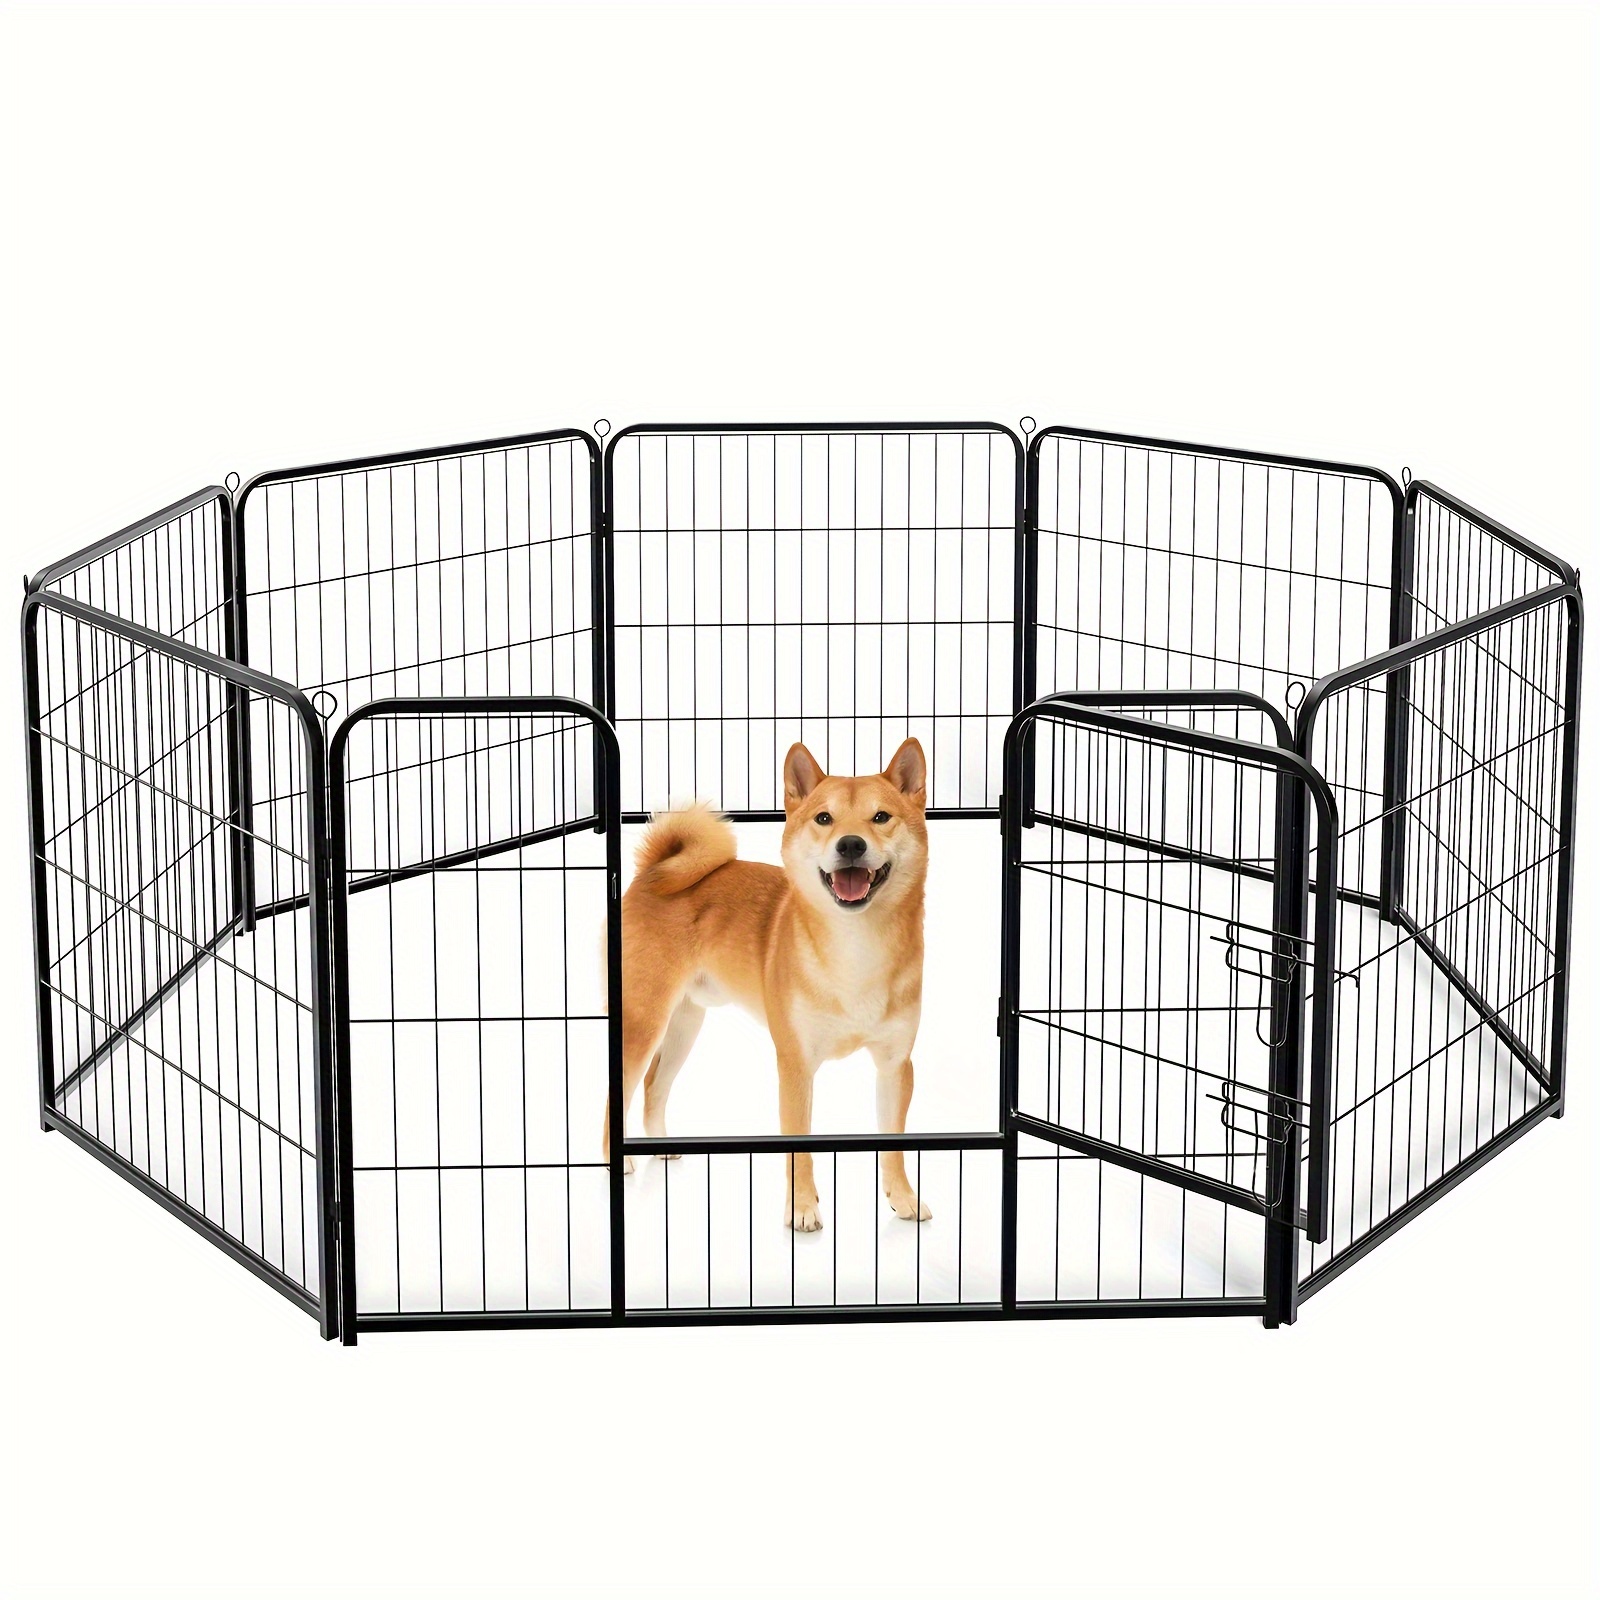 

Dog Playpen Indoor, 8 Panel Multiple Size Playpen For Puppy Dogs, Metal Exercise Pen With Door, Dog Pen For Camping, Outdoor, Small/medium Pets-8 Panels